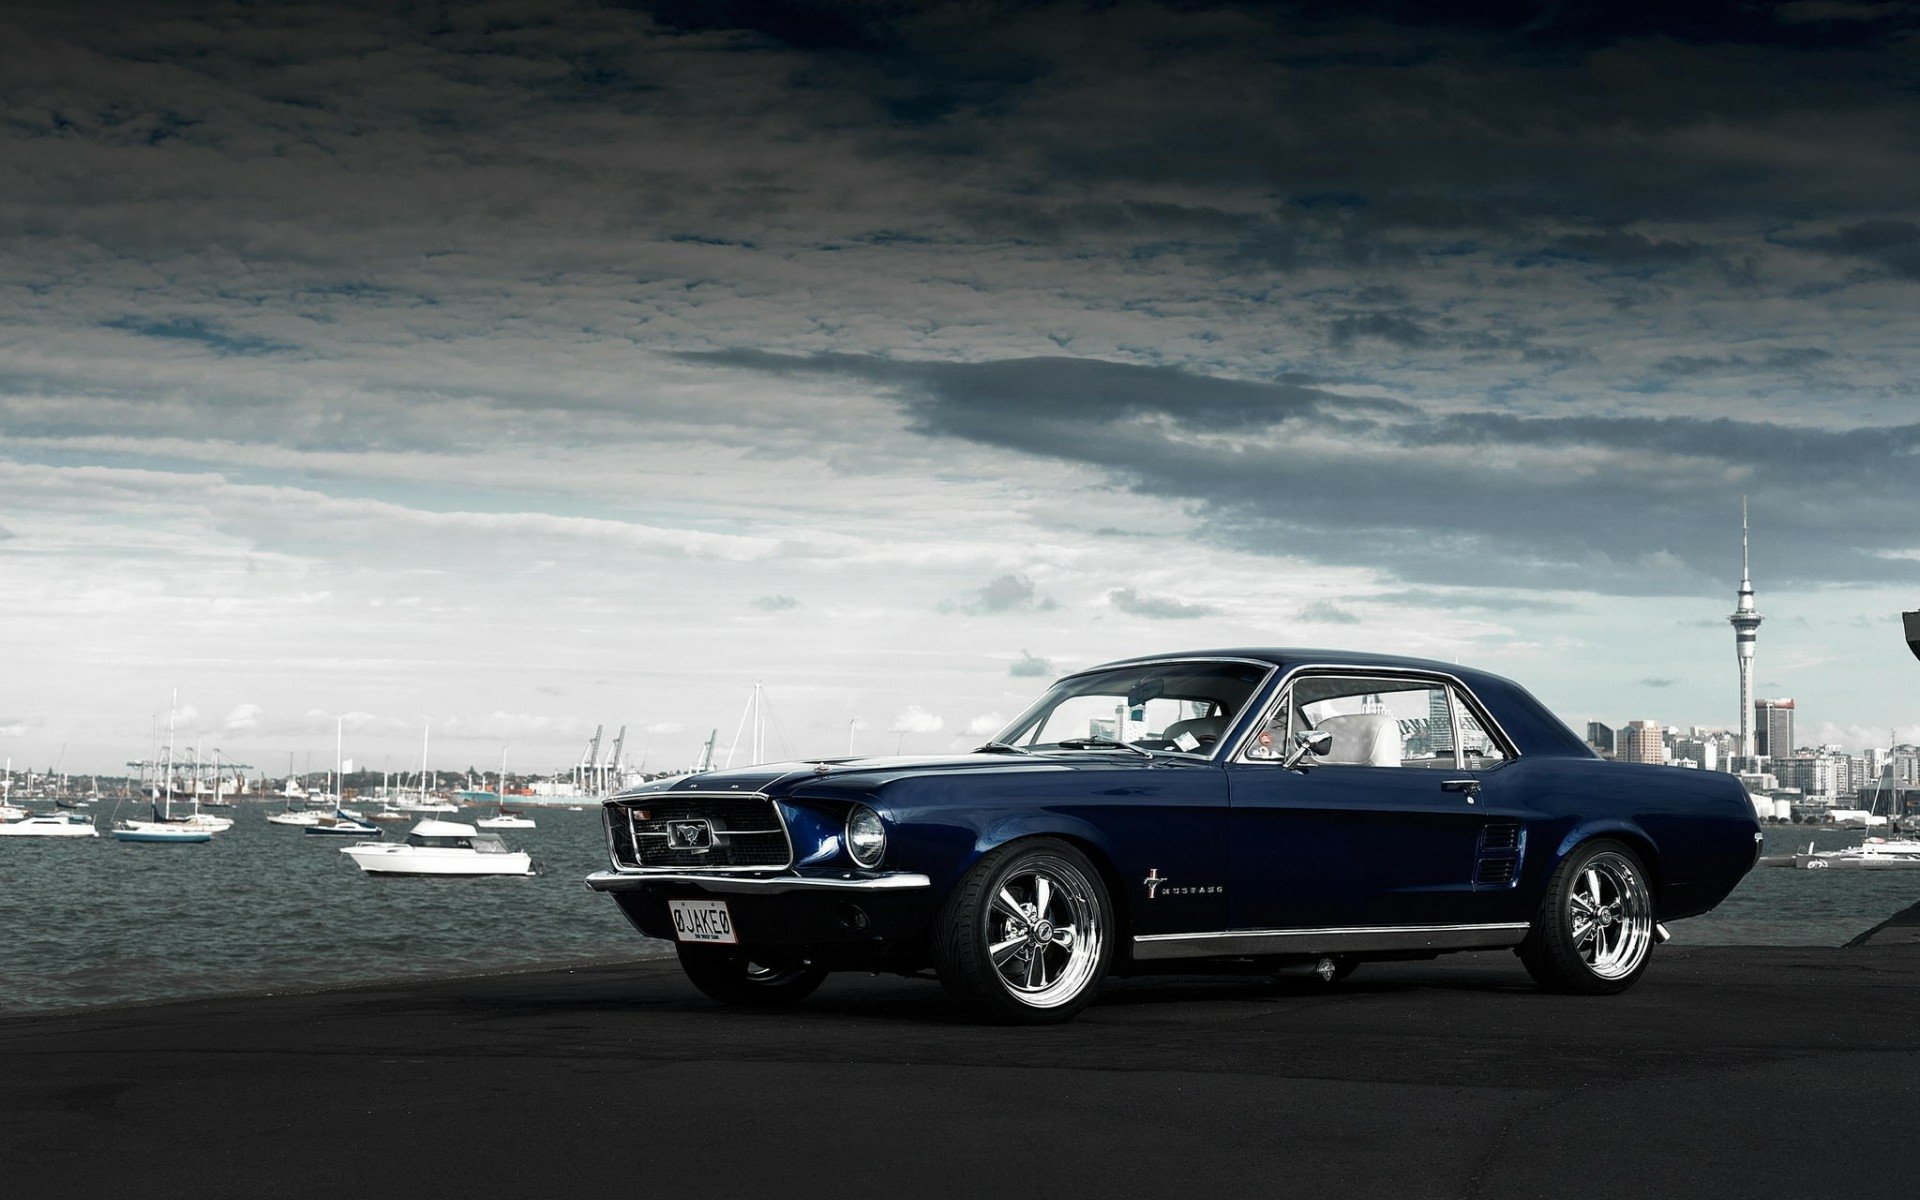 HD desktop wallpaper featuring a classic Ford Mustang parked by a coastal cityscape under a dramatic sky.